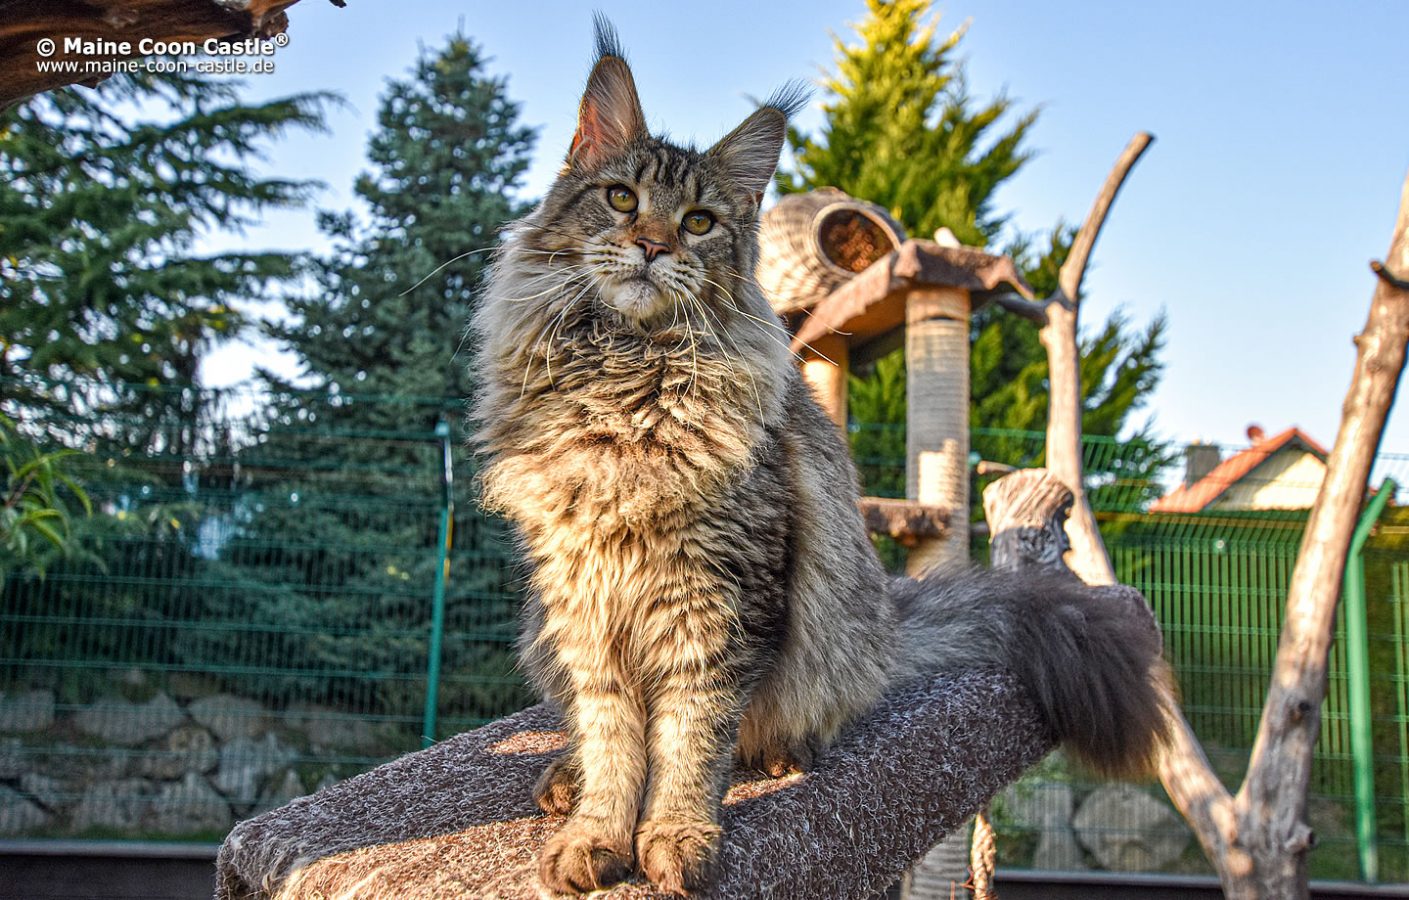 Anja of Maine Coon Castle